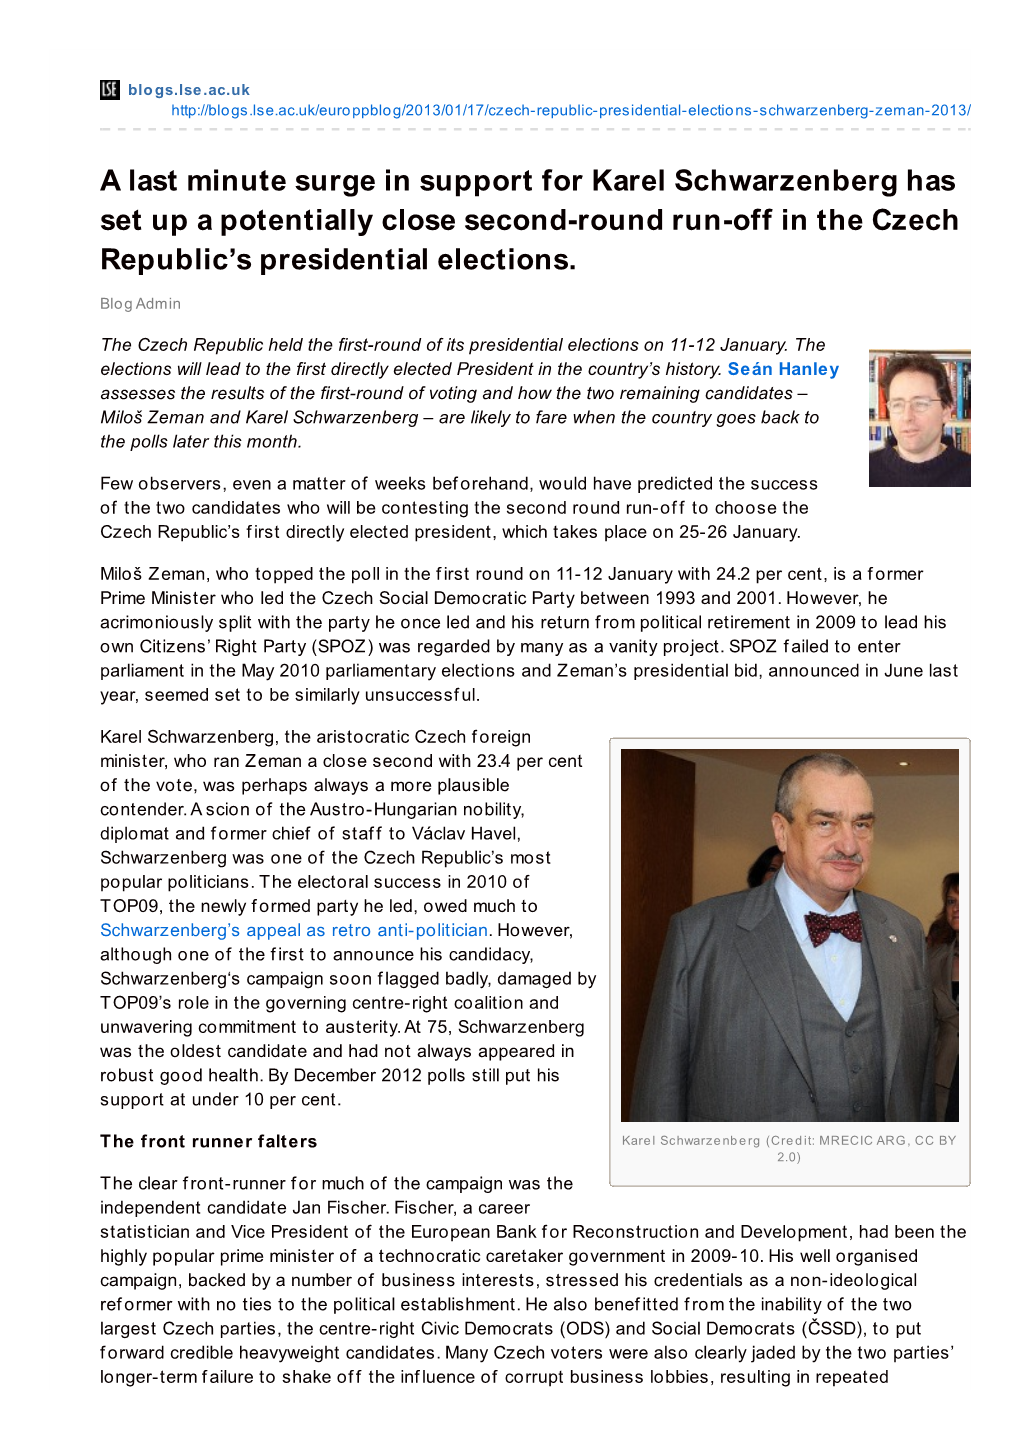 A Last Minute Surge in Support for Karel Schwarzenberg Has Set up a Potentially Close Second-Round Run-Off in the Czech Republic’S Presidential Elections